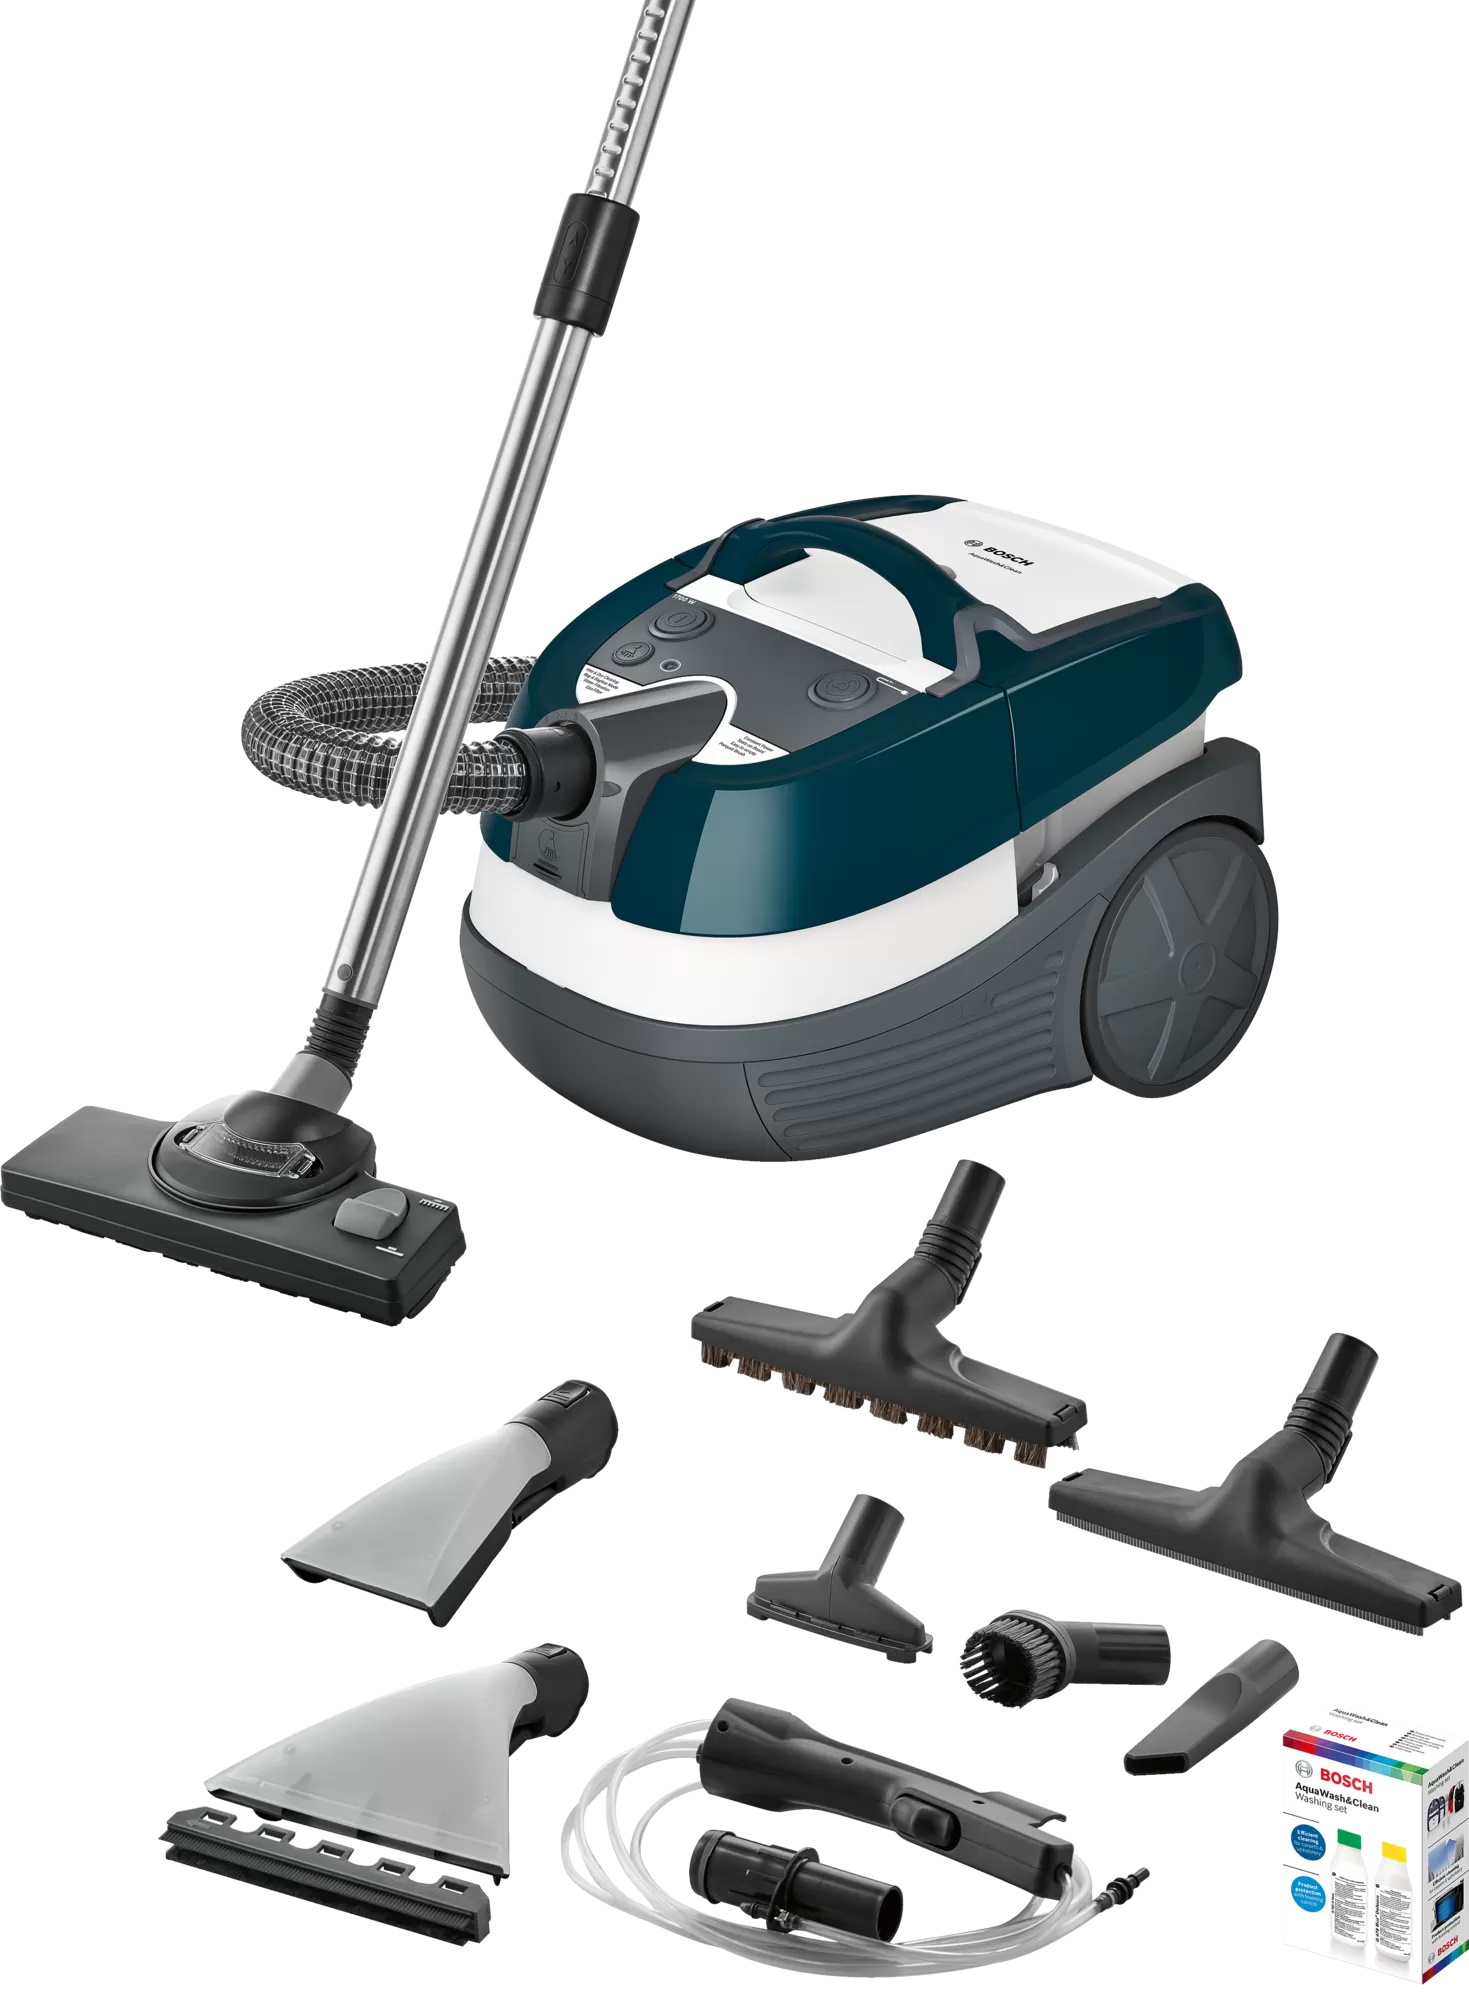 Aspirator Wet&Dry Bosch BWD41720 3in1 Serie 4 1700 W AquaWash&Clean turquoise-white-grey 1700